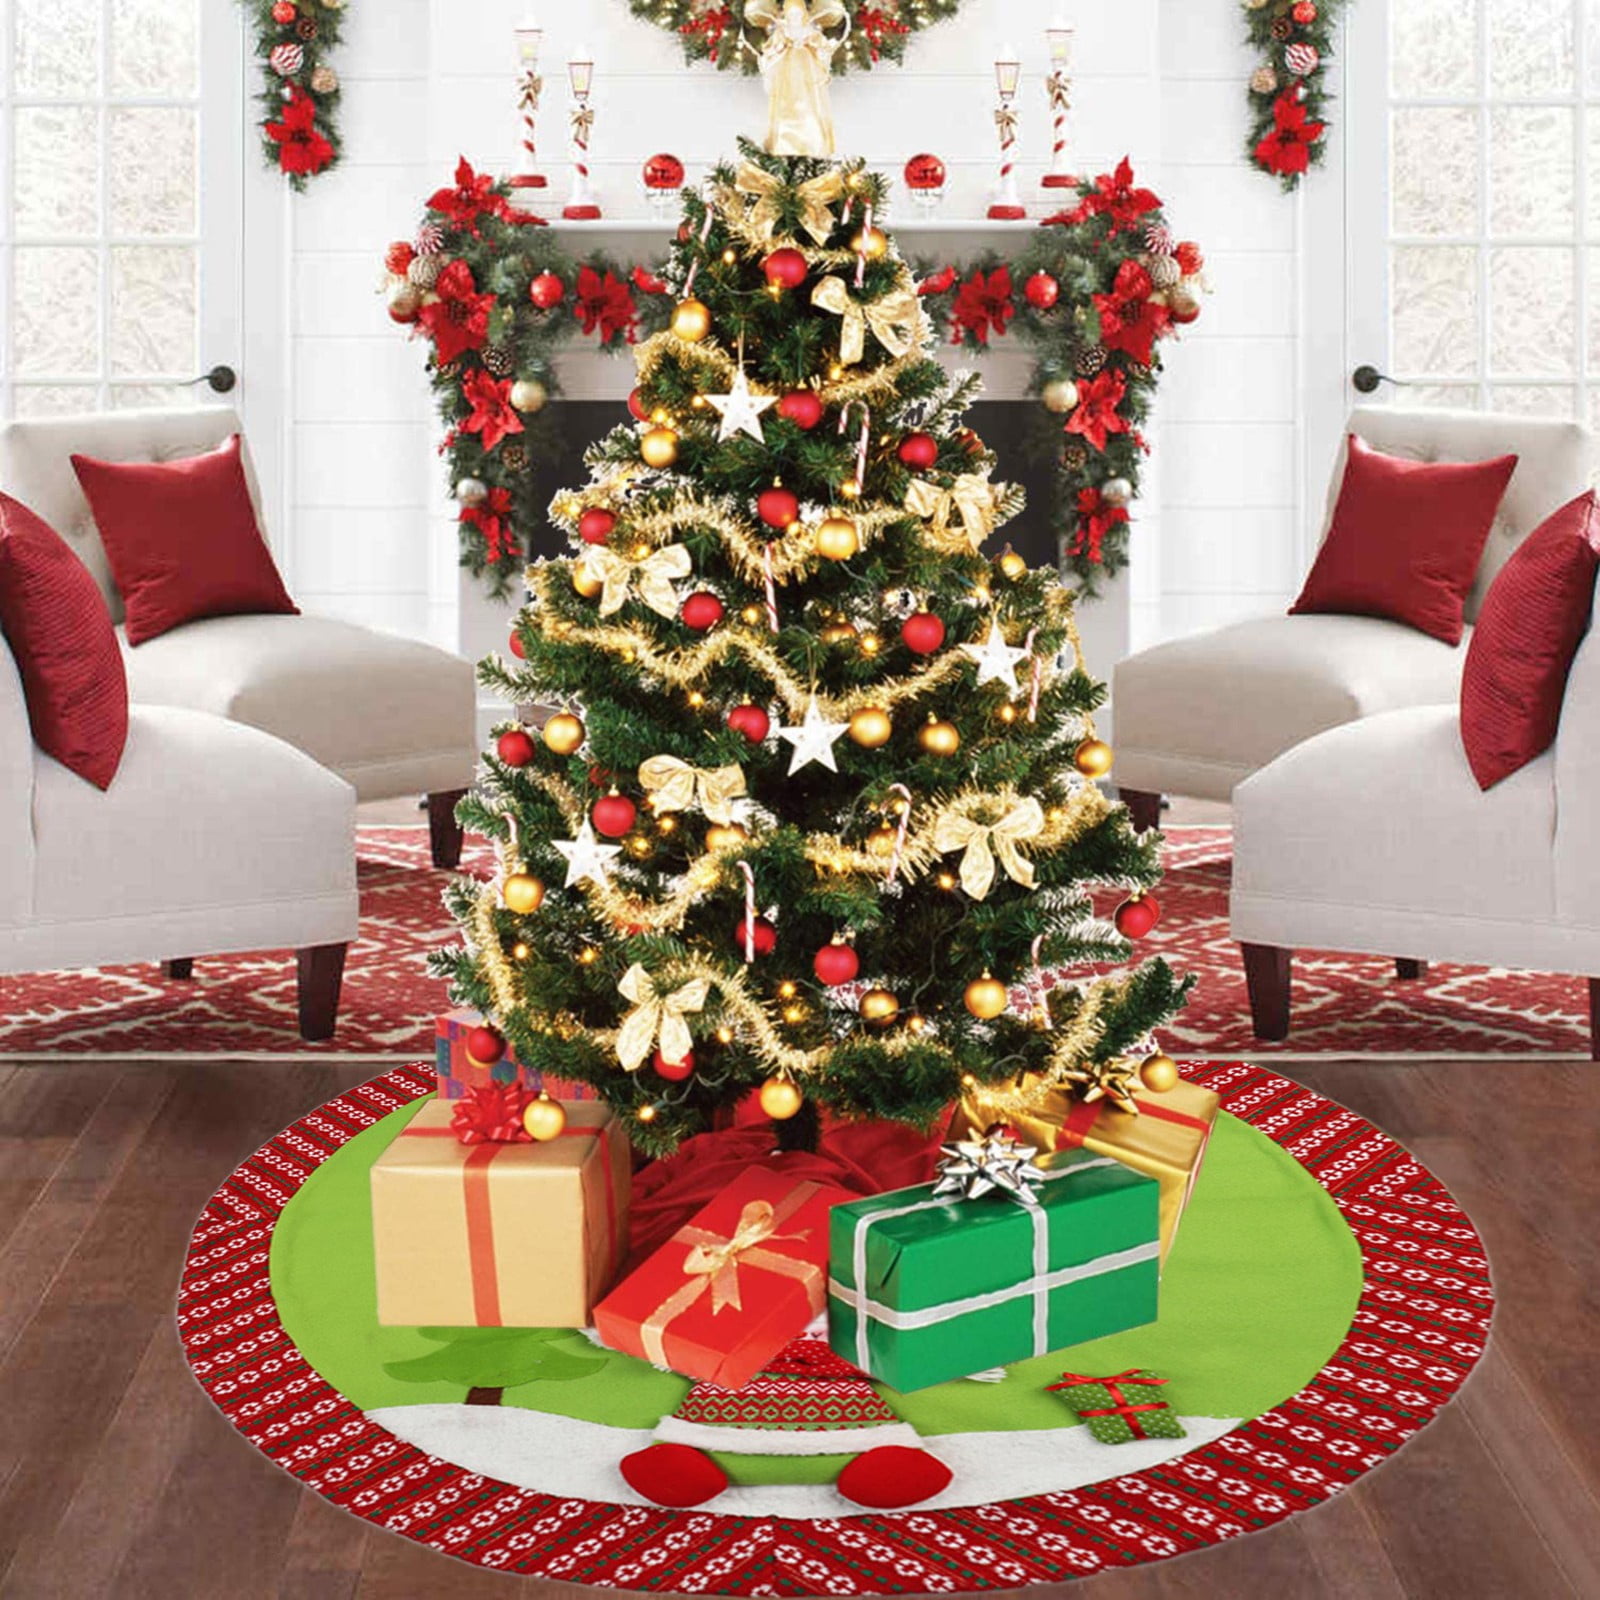 Winter New Year House Party Decoration Supplies Green Snowflake Stripes Xmas Tree Skirt Christmas Decorations